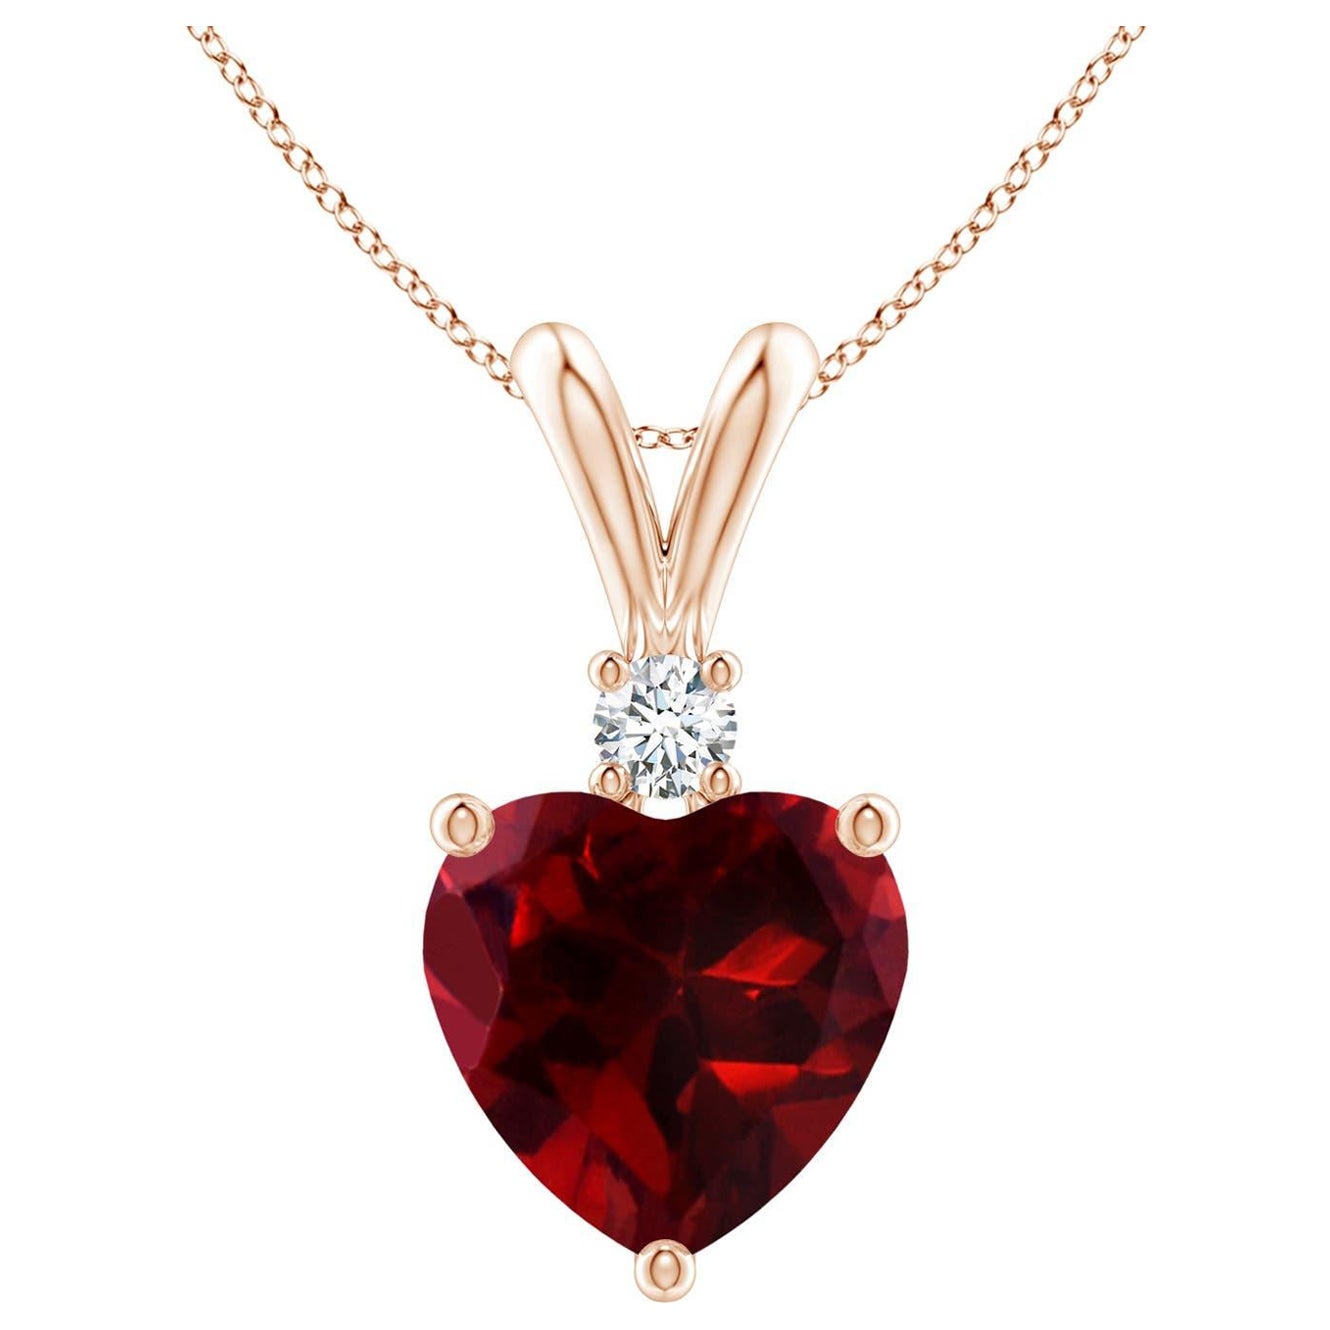 Natural Heart-Shaped 1.85ct Garnet Pendant with Diamond in 14ct Rose Gold